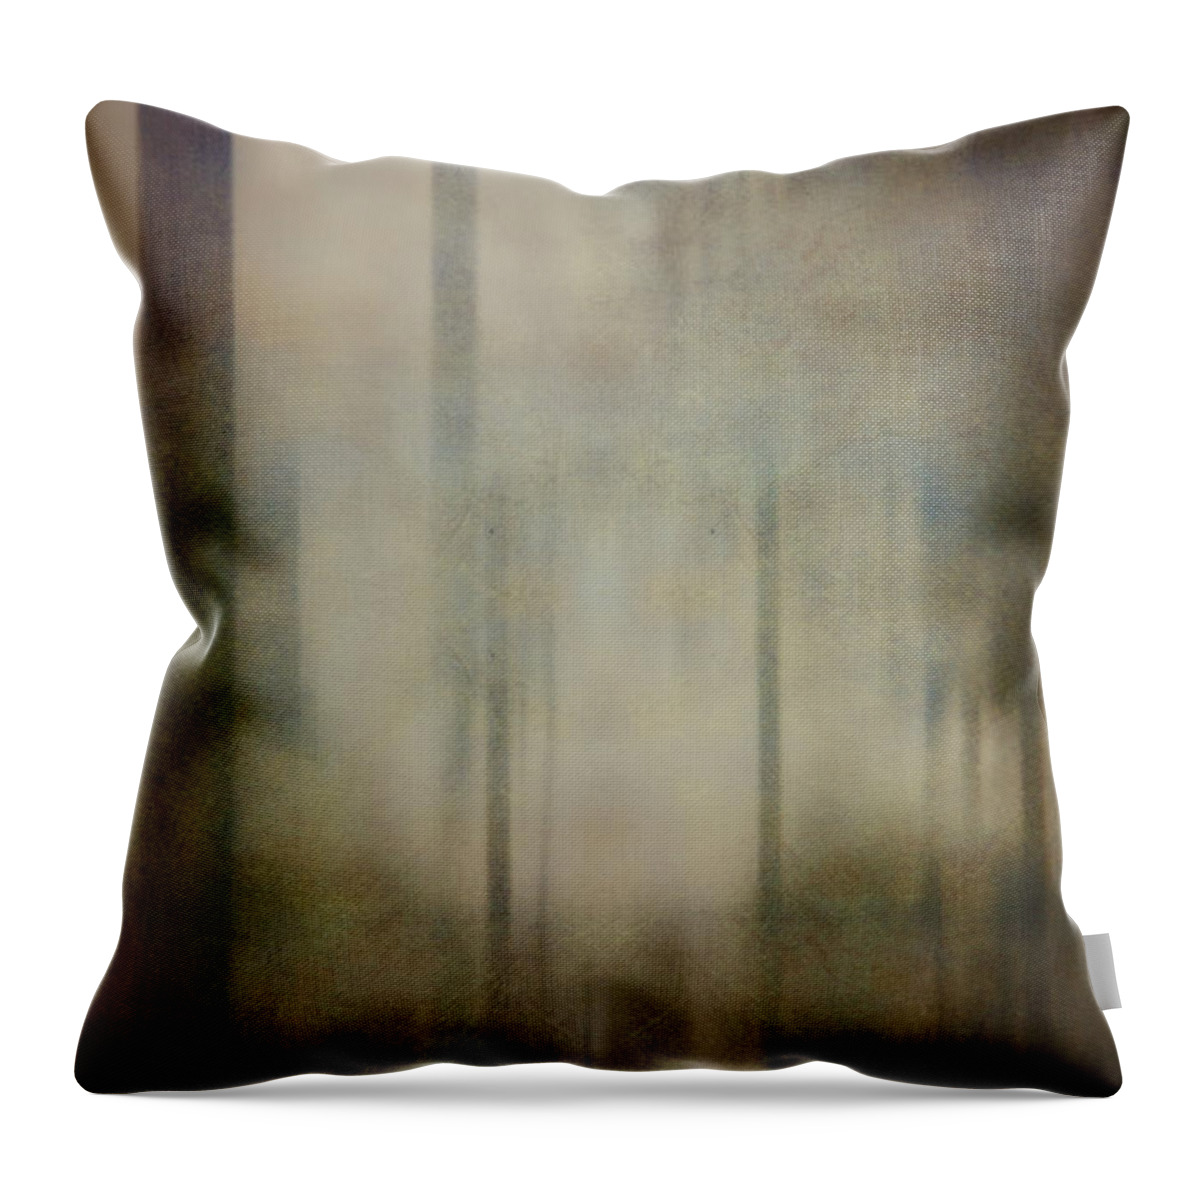 Tree Throw Pillow featuring the photograph In The Woods by Margie Hurwich